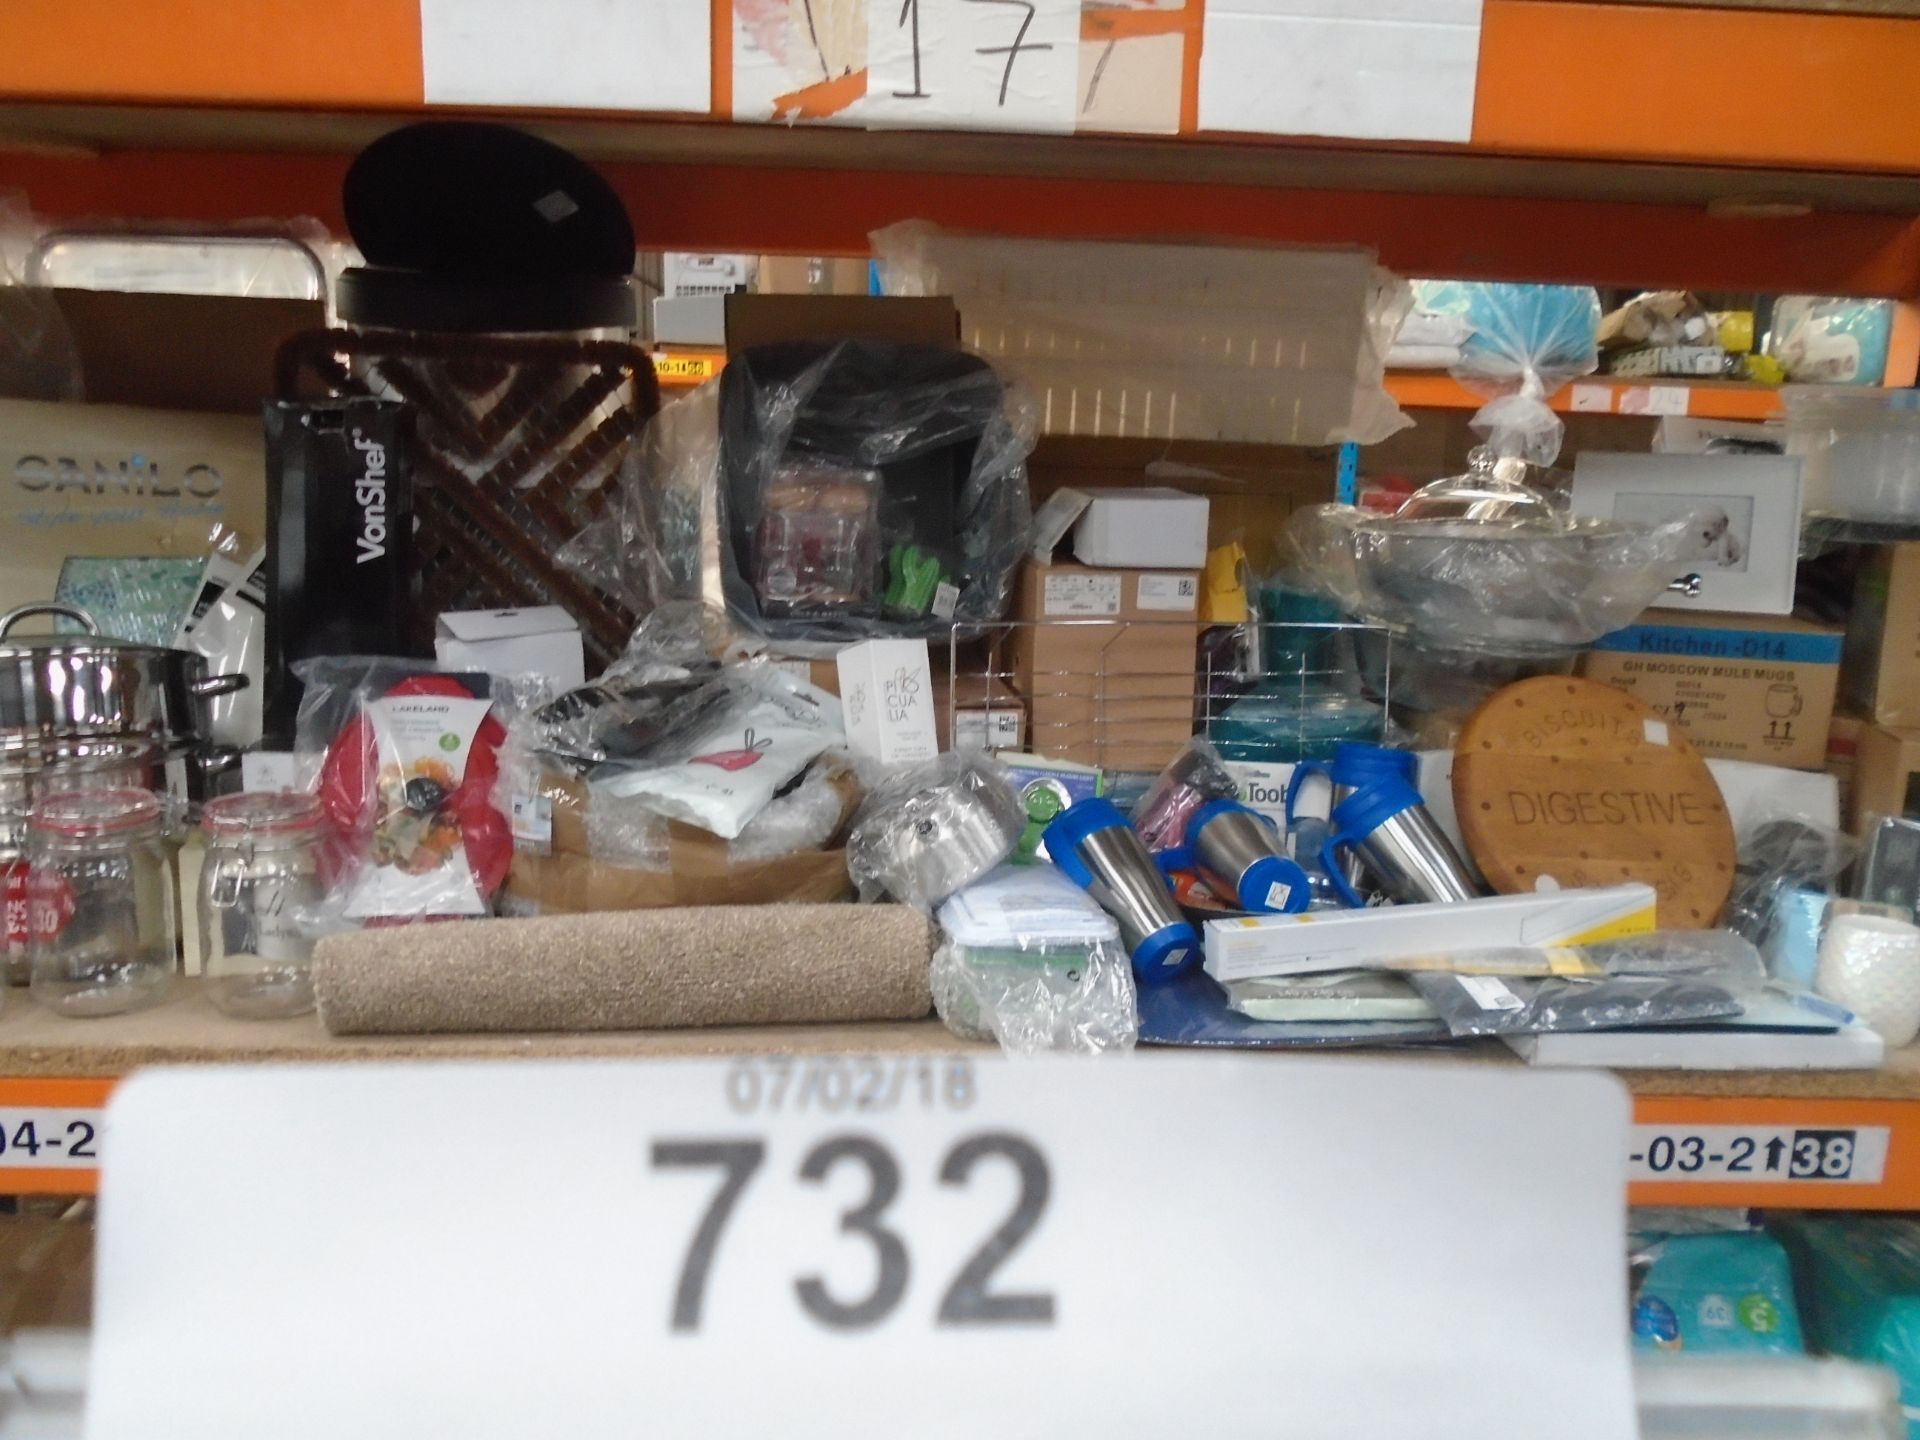 A shelf of home items including toilet seat, Swan egg boiler, thermal cups etc. - Mixed condition (